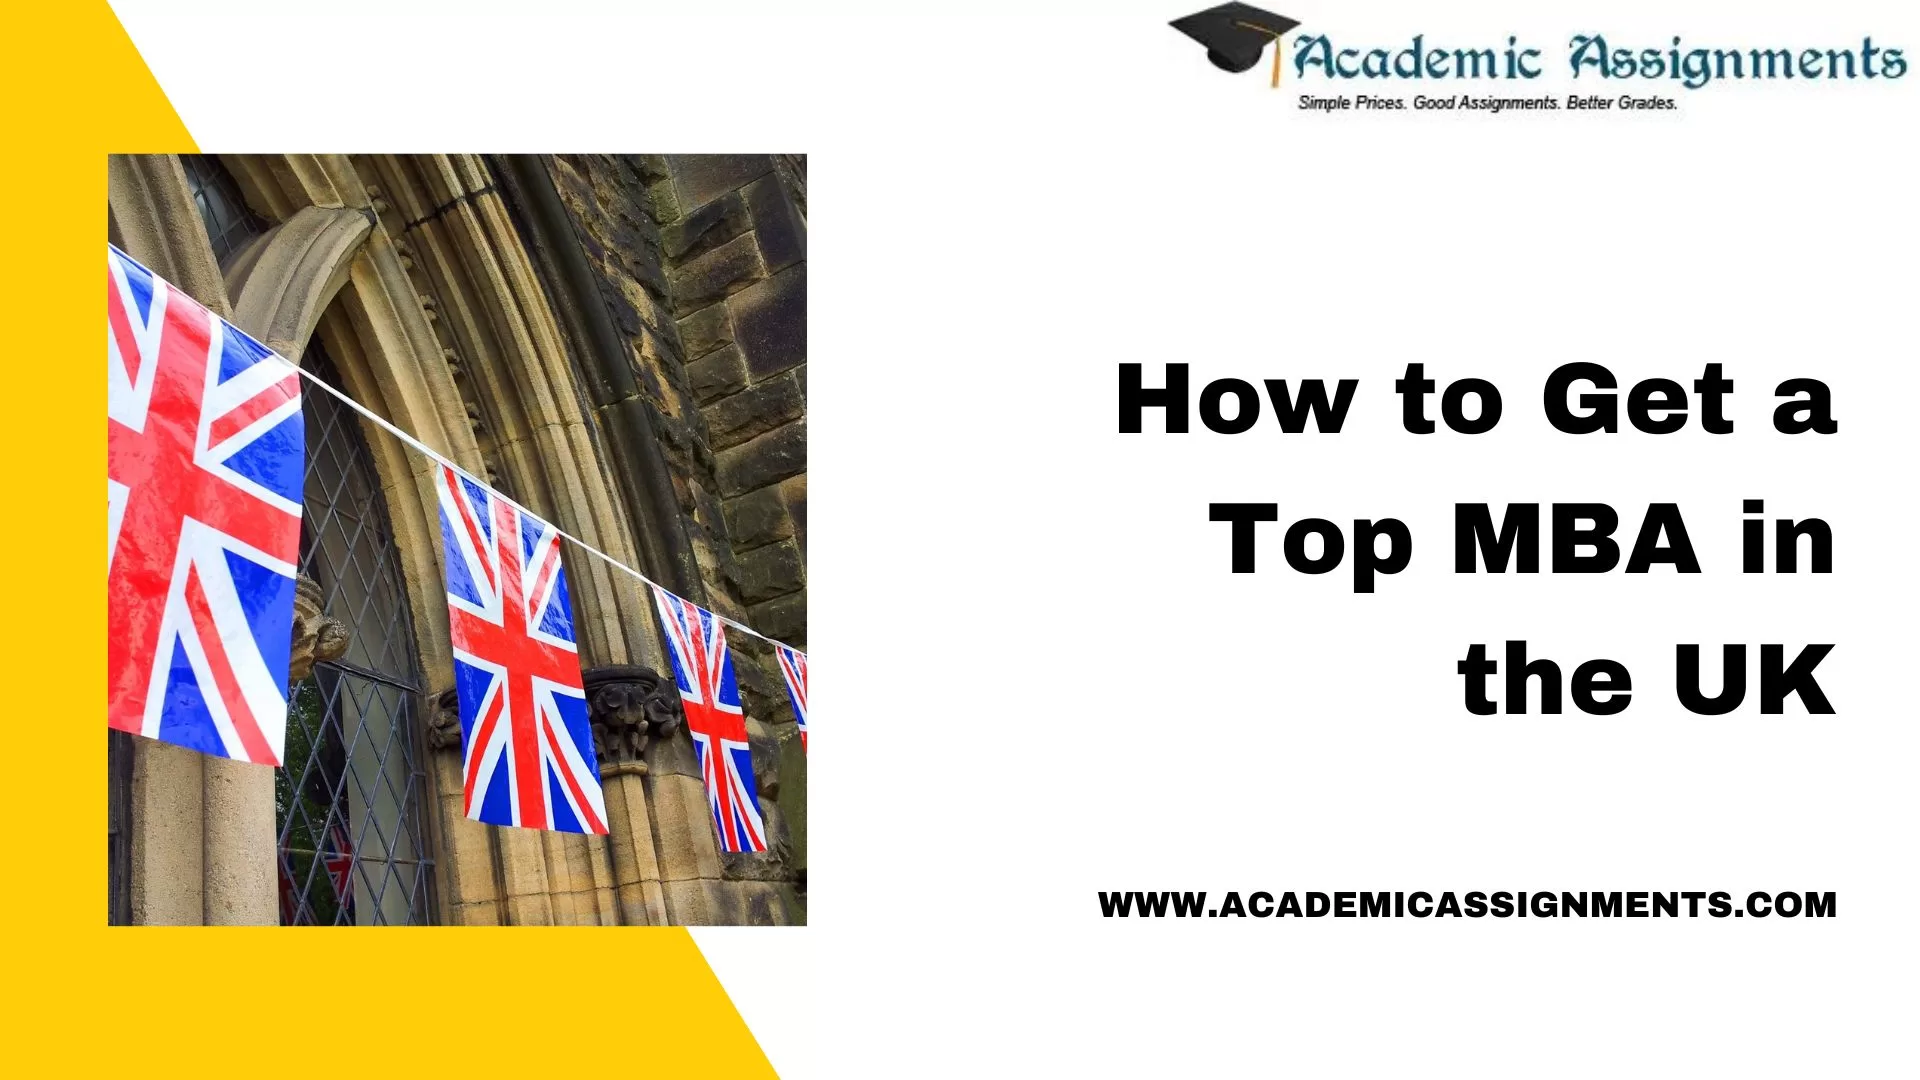 How to Get a Top MBA in the UK